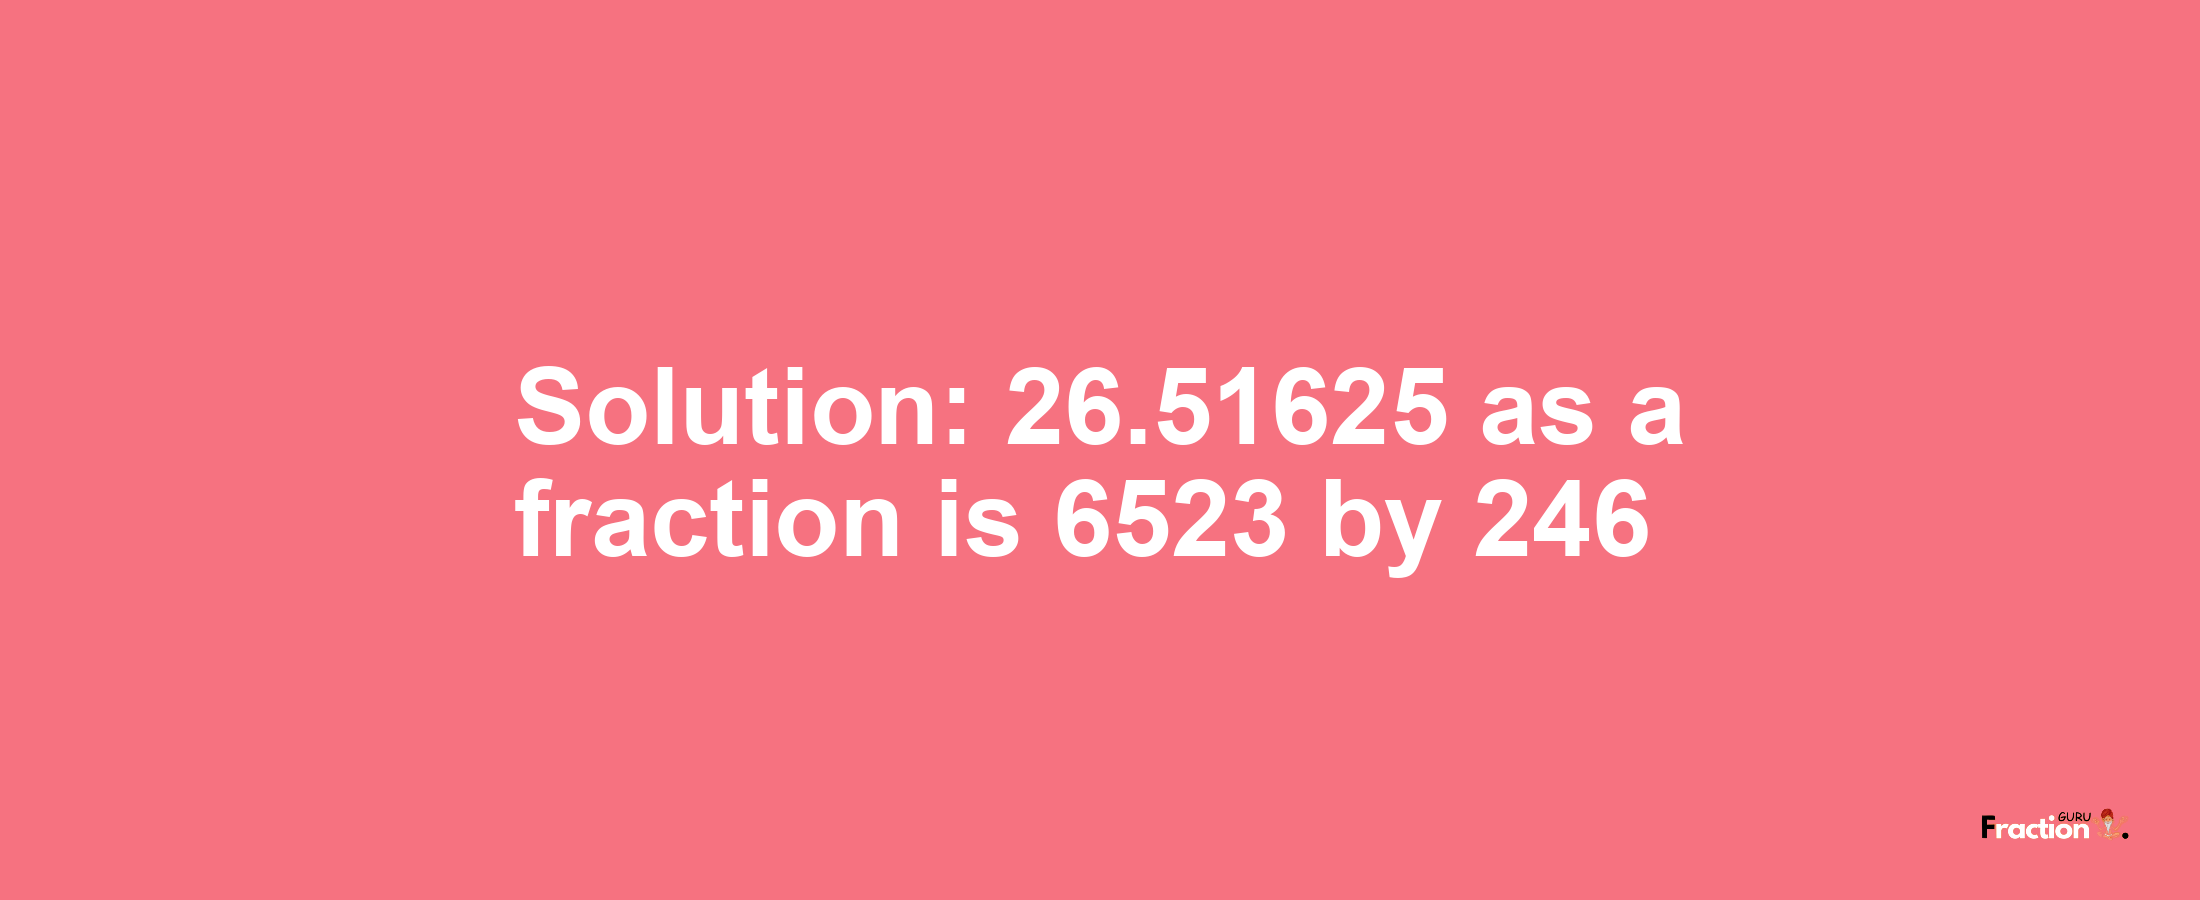 Solution:26.51625 as a fraction is 6523/246